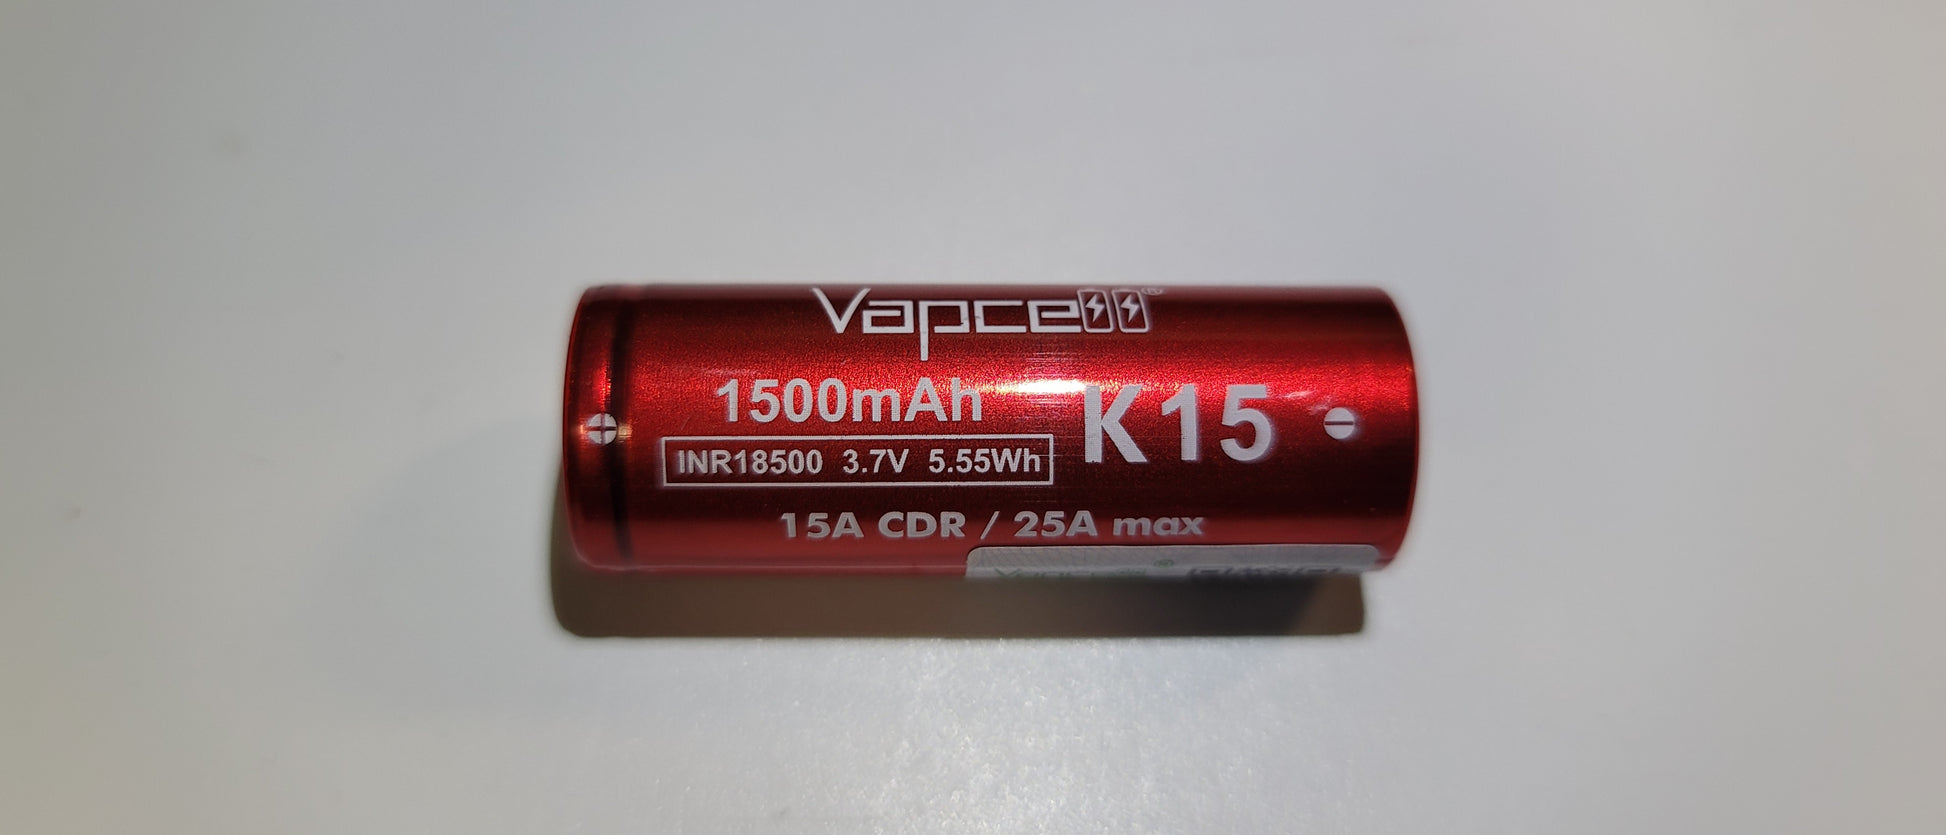 Vapcell K15 18500 1500mAh 15A Li-ion Rechargeable Battery **** HAS TO BE SHIPPED WITH FLASLIGHT + FEDEX ***